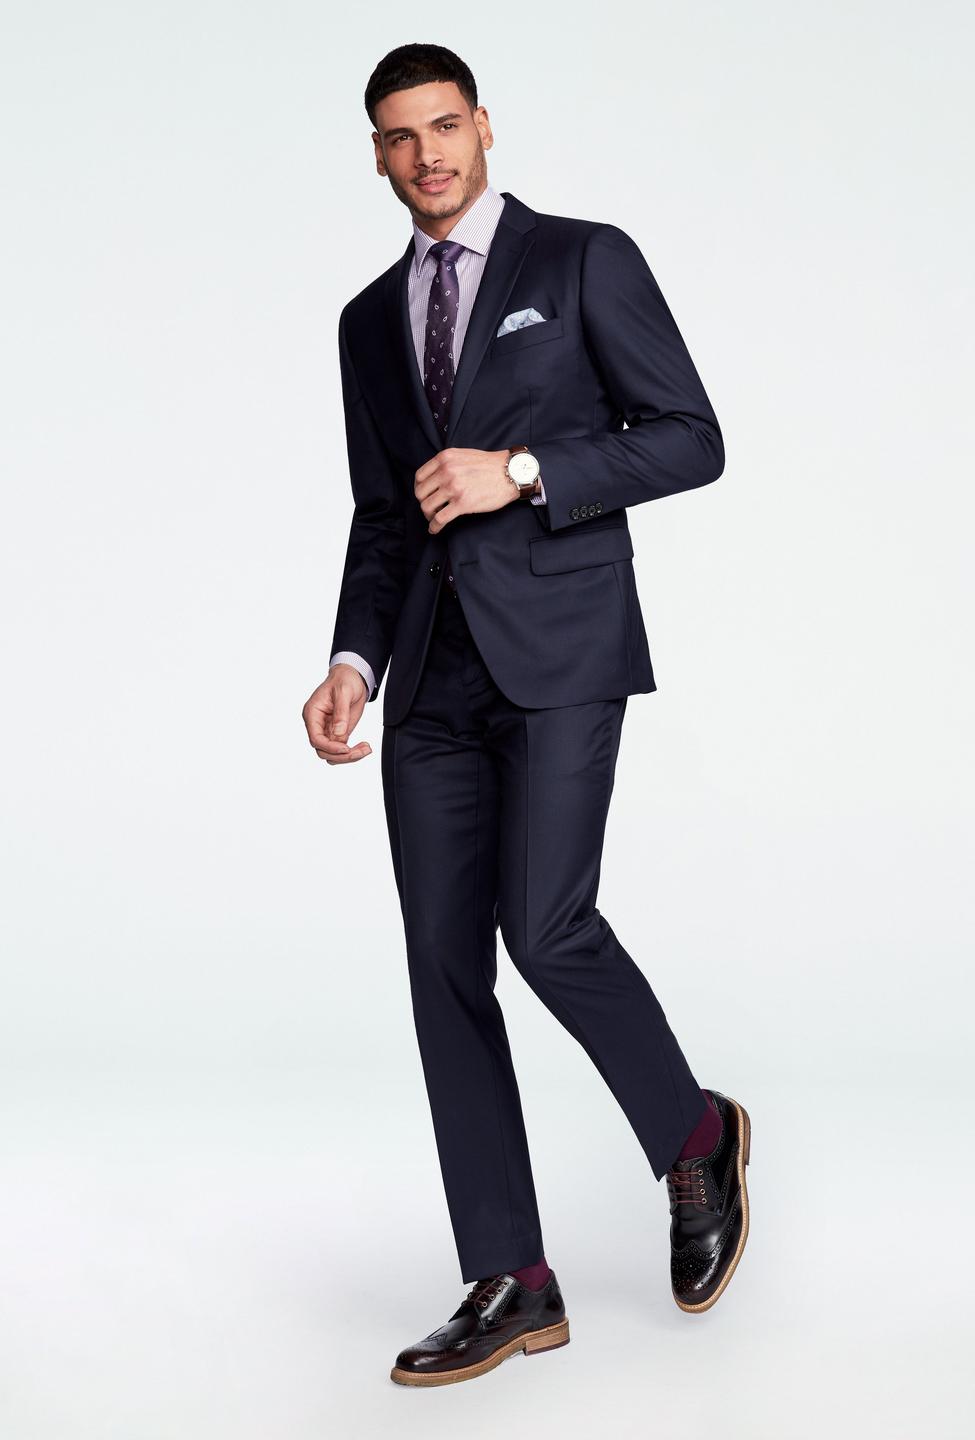 Blue suit - Harrogate Solid Design from Luxury Indochino Collection